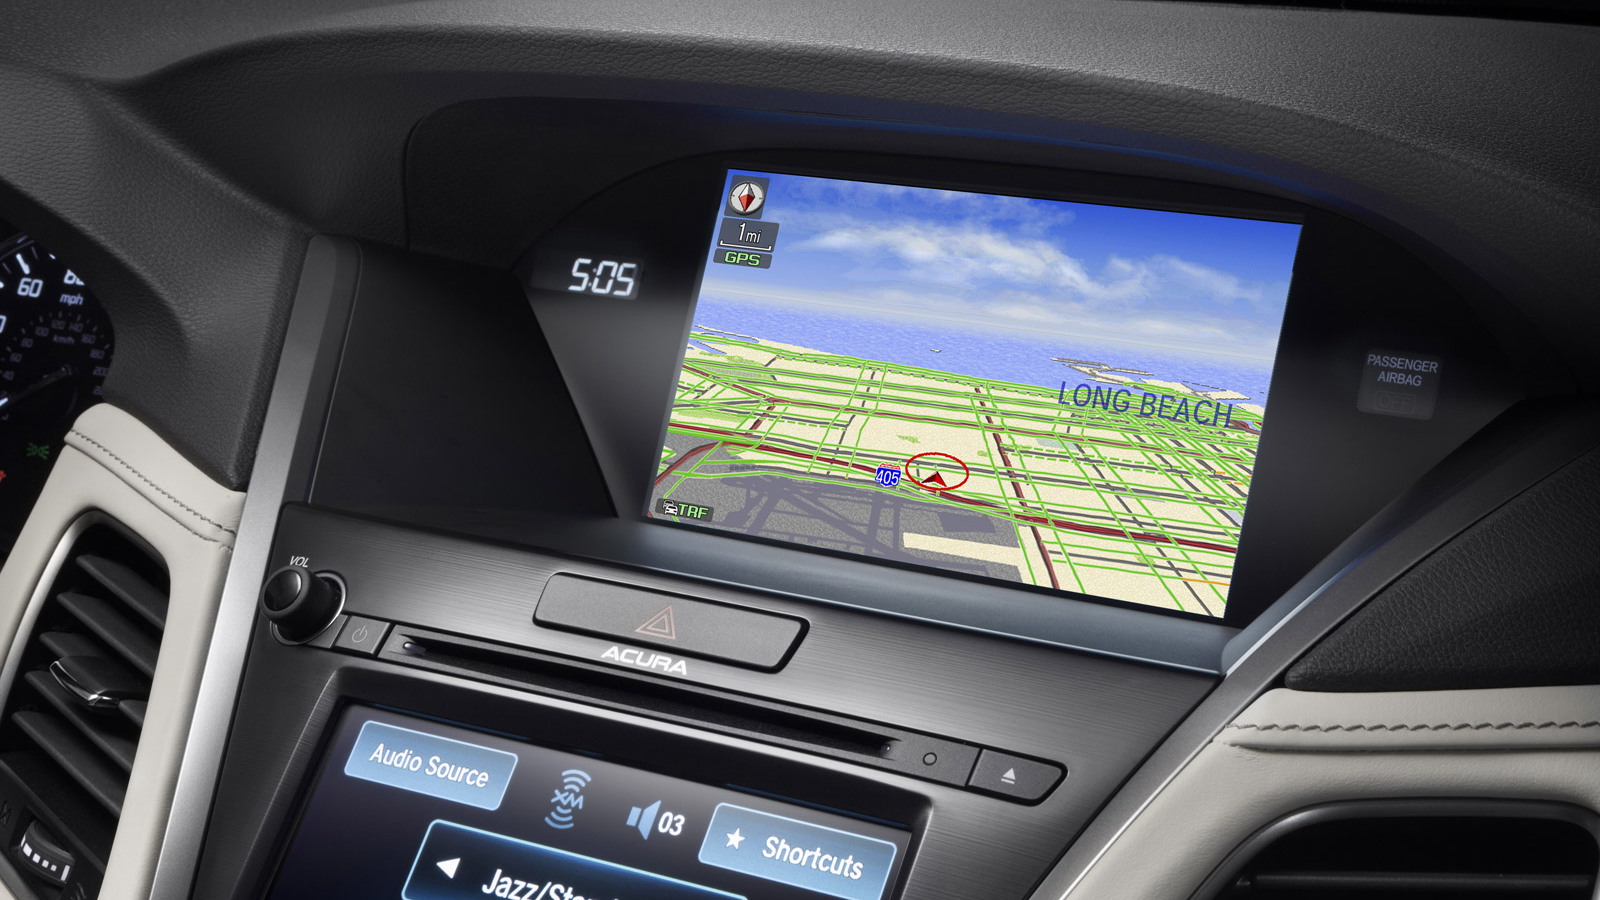 Next-generation AcuraLink connectivity system in the 2014 Acura RLX